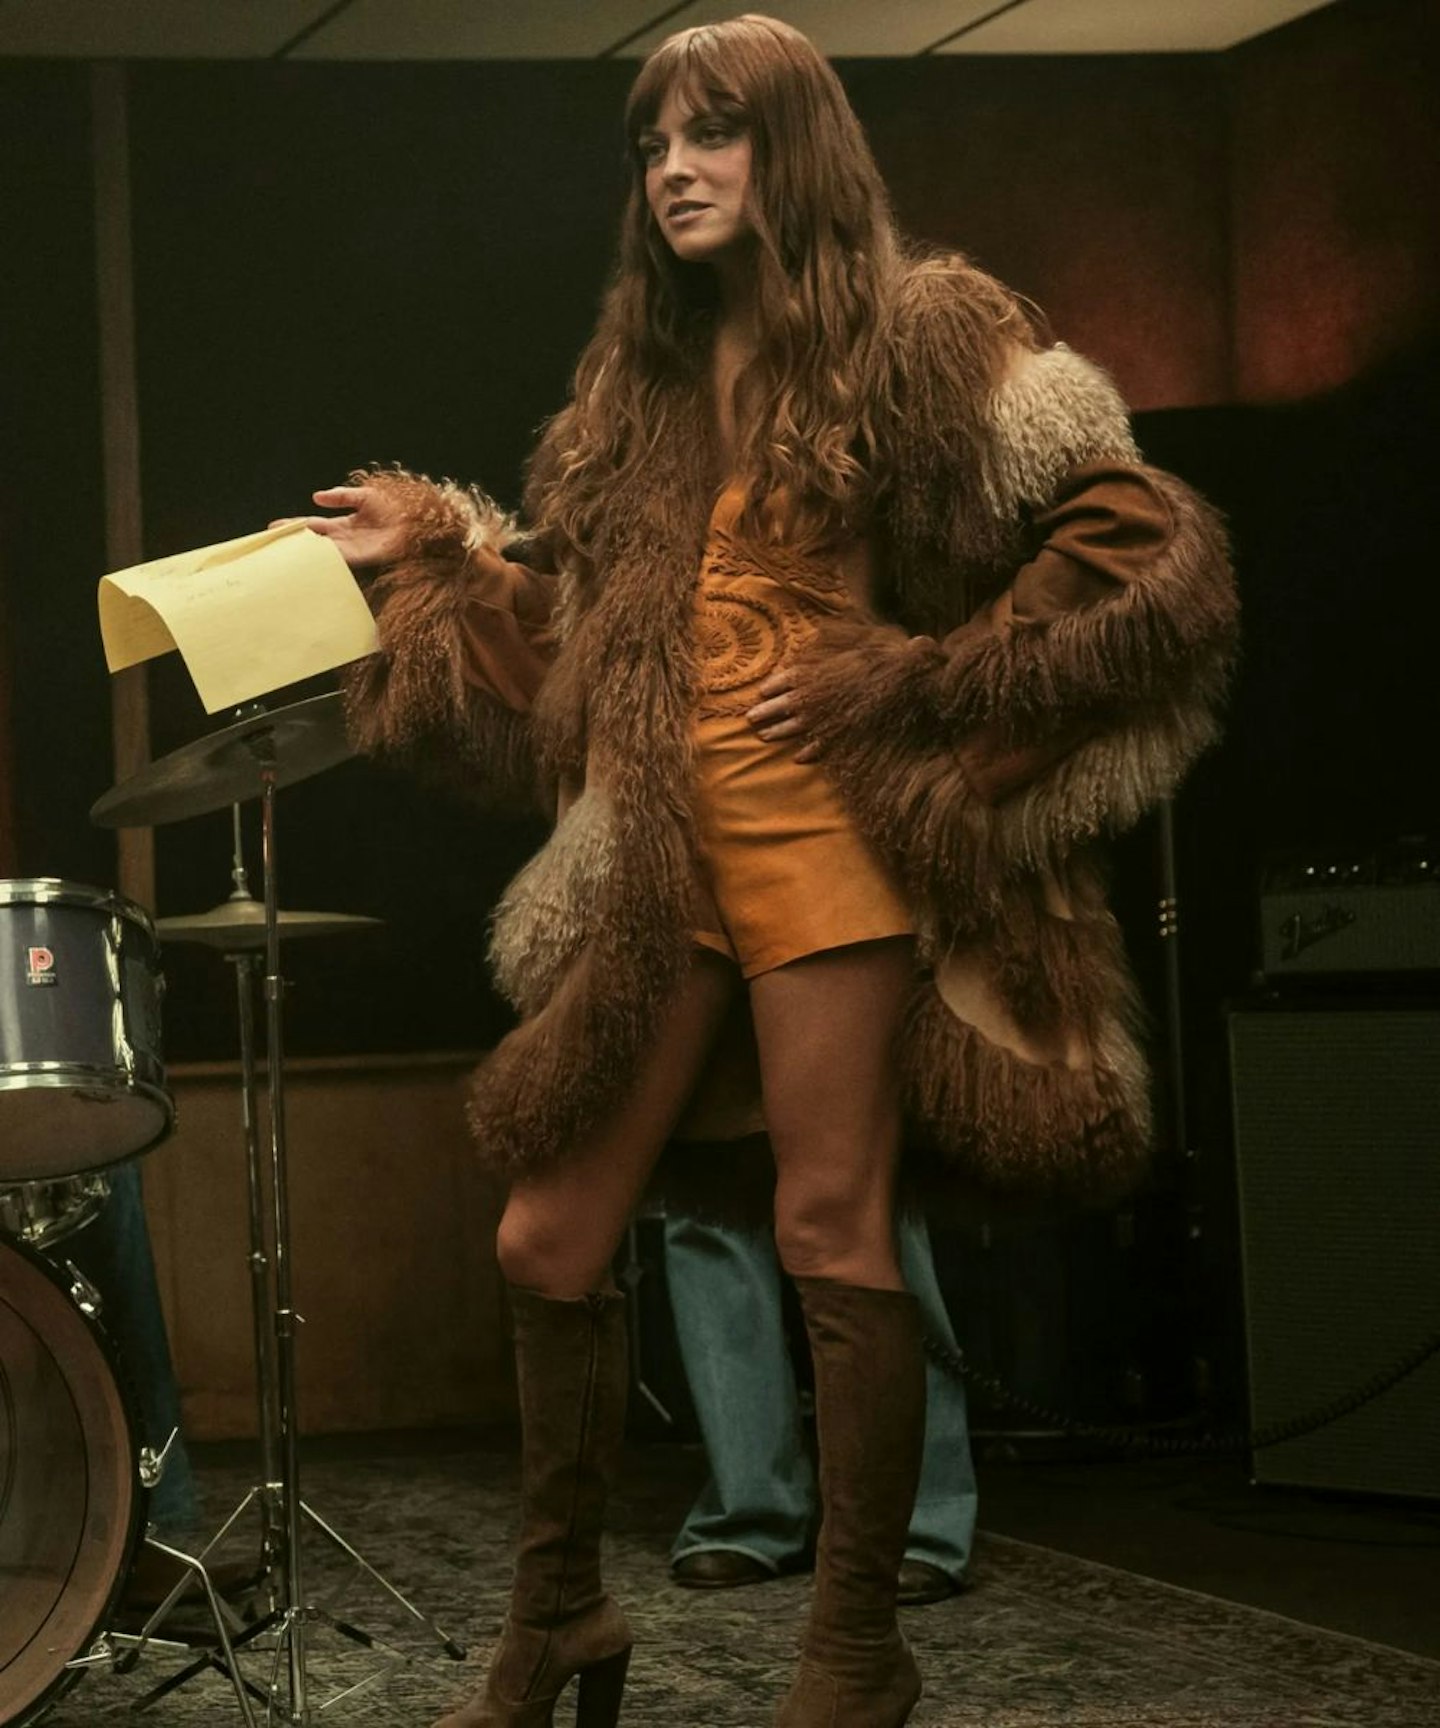 Daisy Jones And The Six Outfits: Where To Shop The Looks From The Show